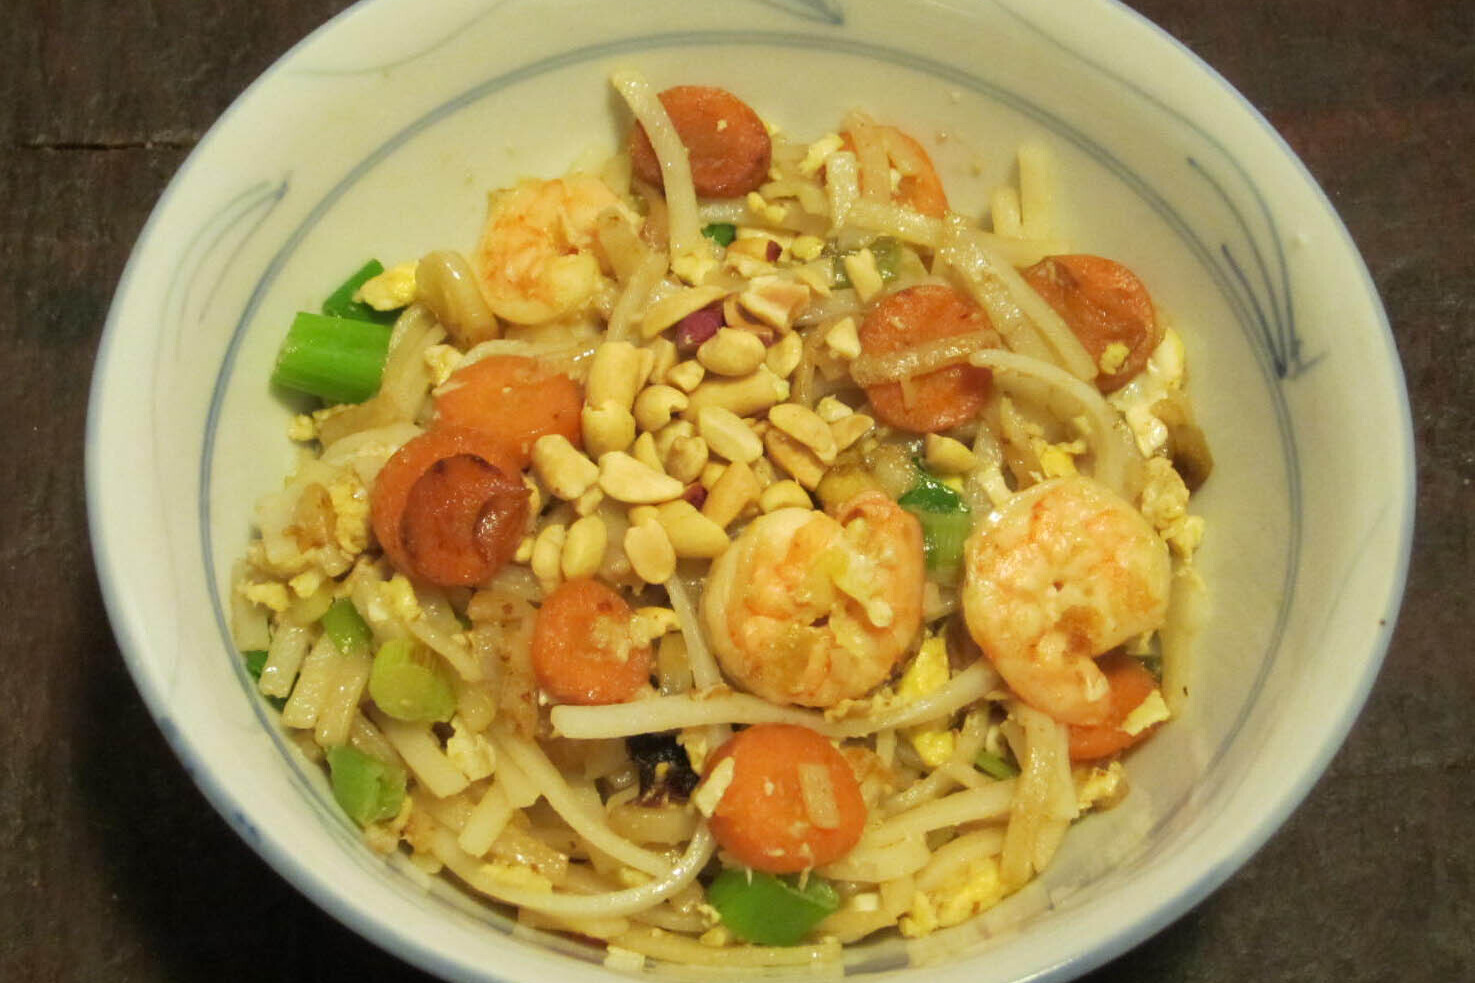 Rice noodles with shrimp, peanuts, carrots, and scallion